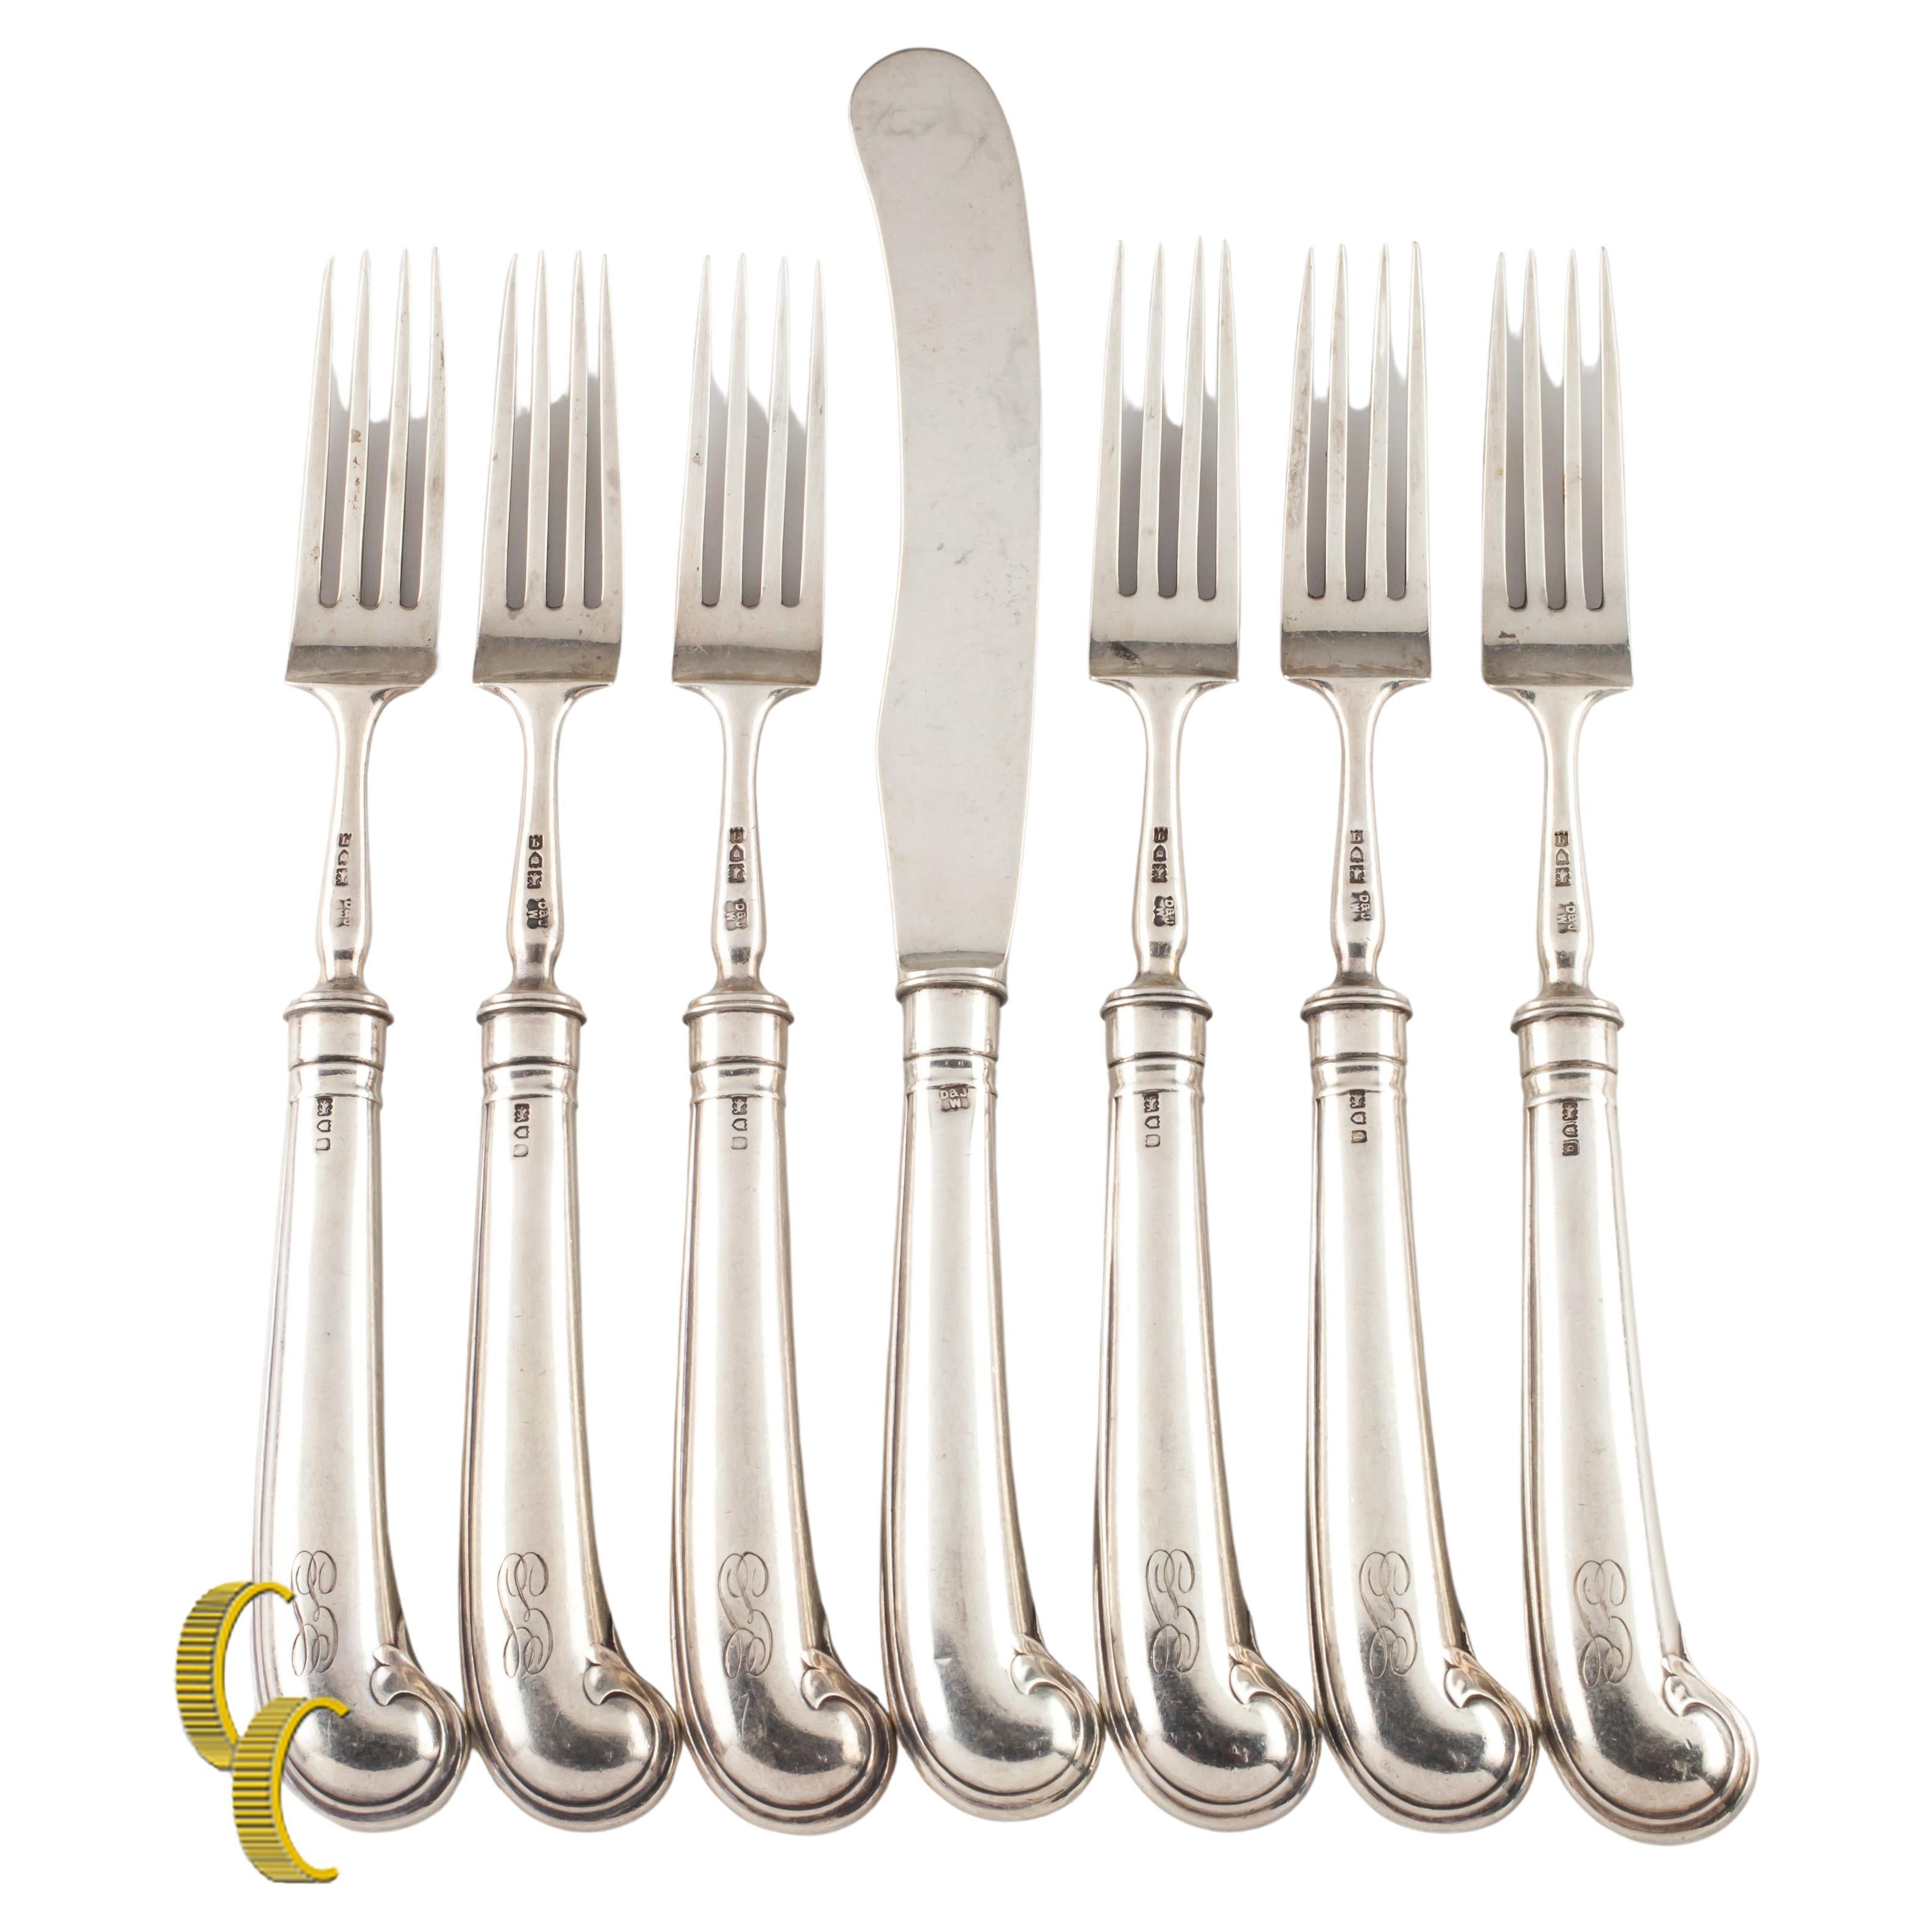 D&J Welby Sterling Silver Flatware Set 6 Forks and 1 Butter Knife London 1911 For Sale